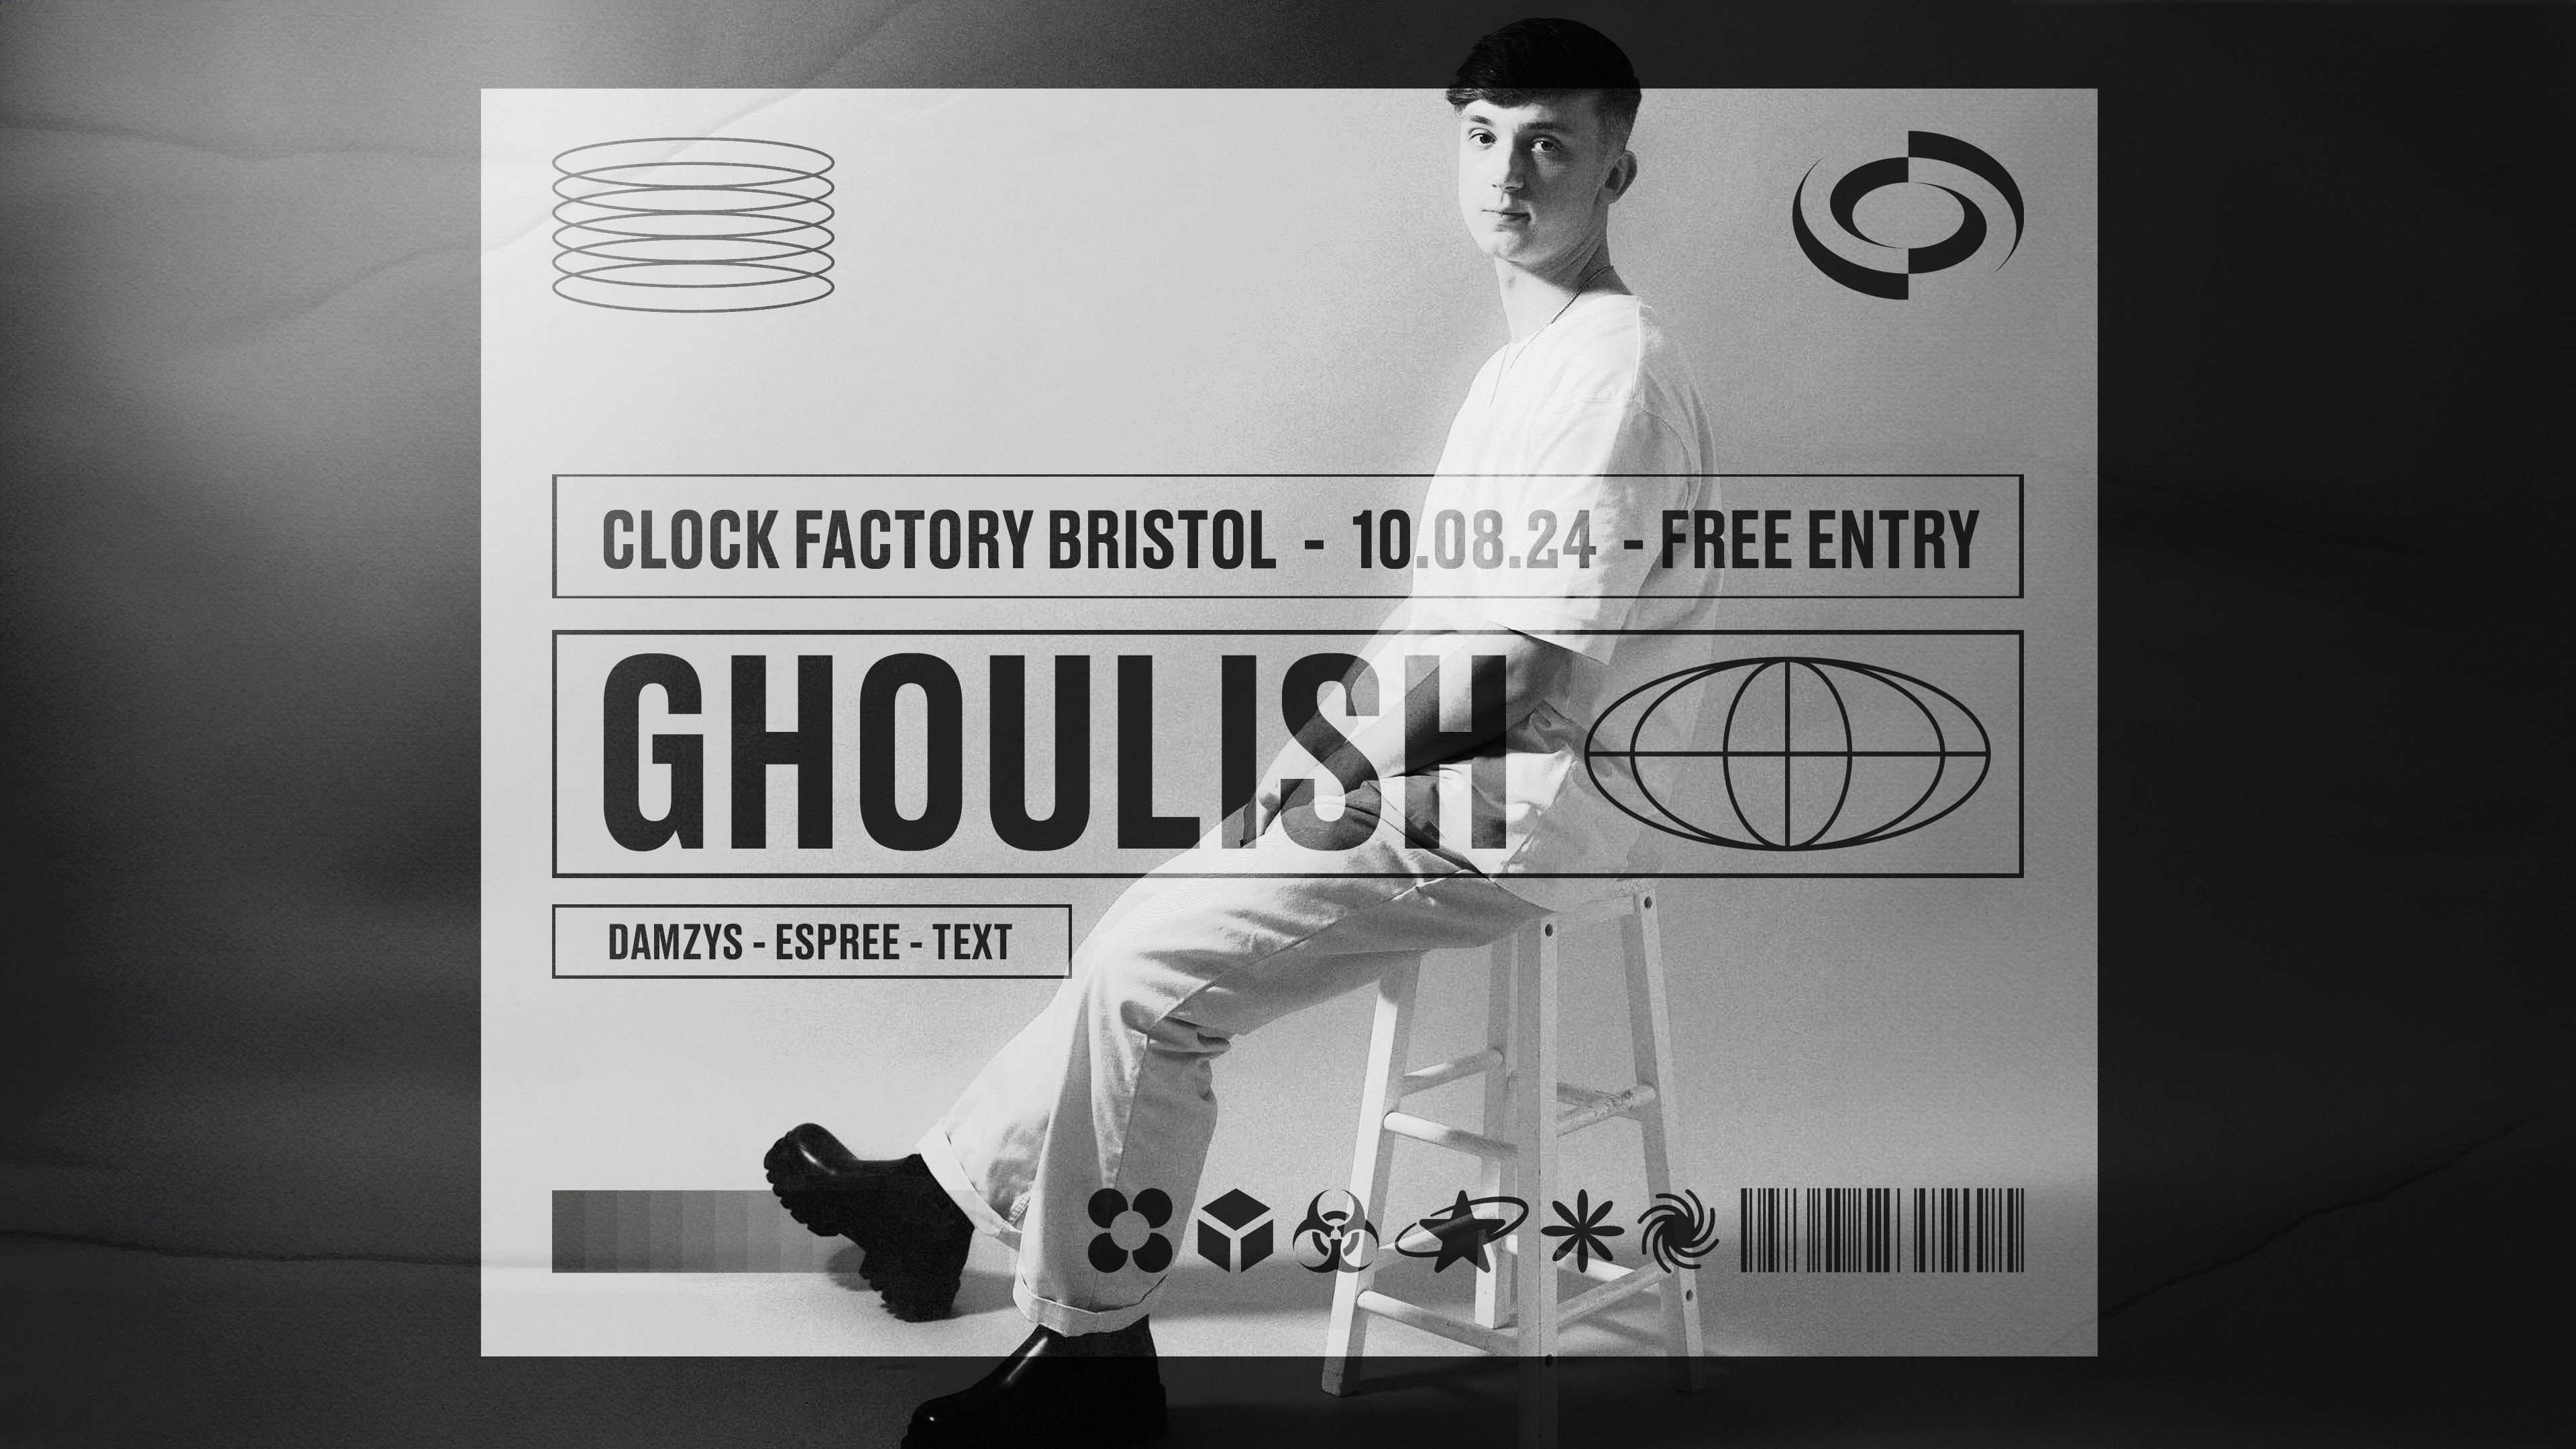 UKG/140 FREE Pop-Up Party • Ghoulish + Guests